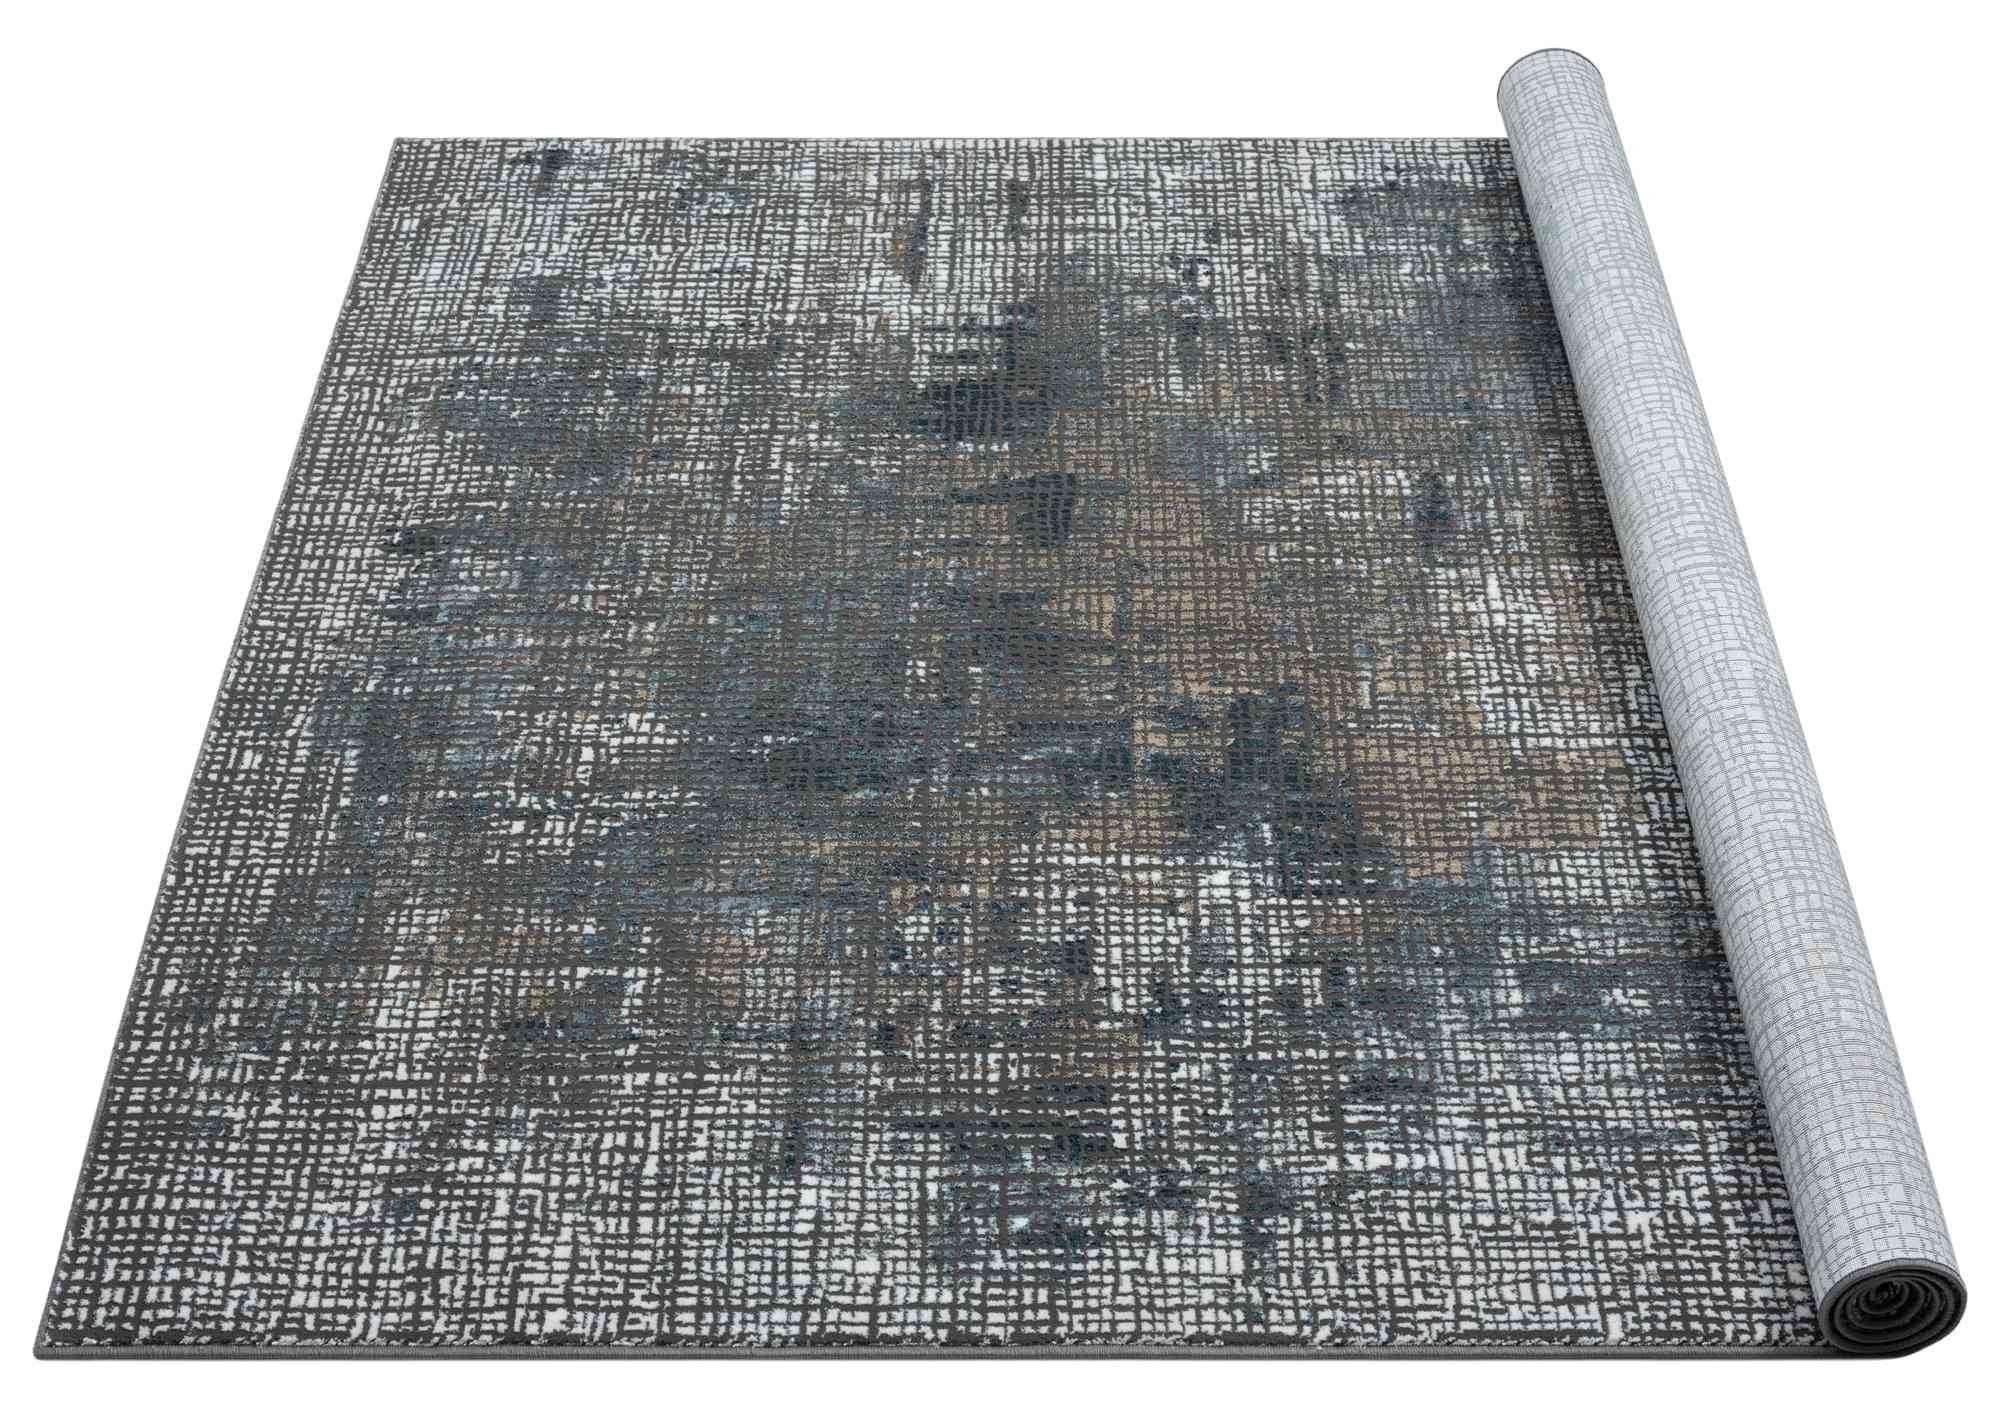 HR Premium Super Soft Polyester Abstract Area Rug #11450